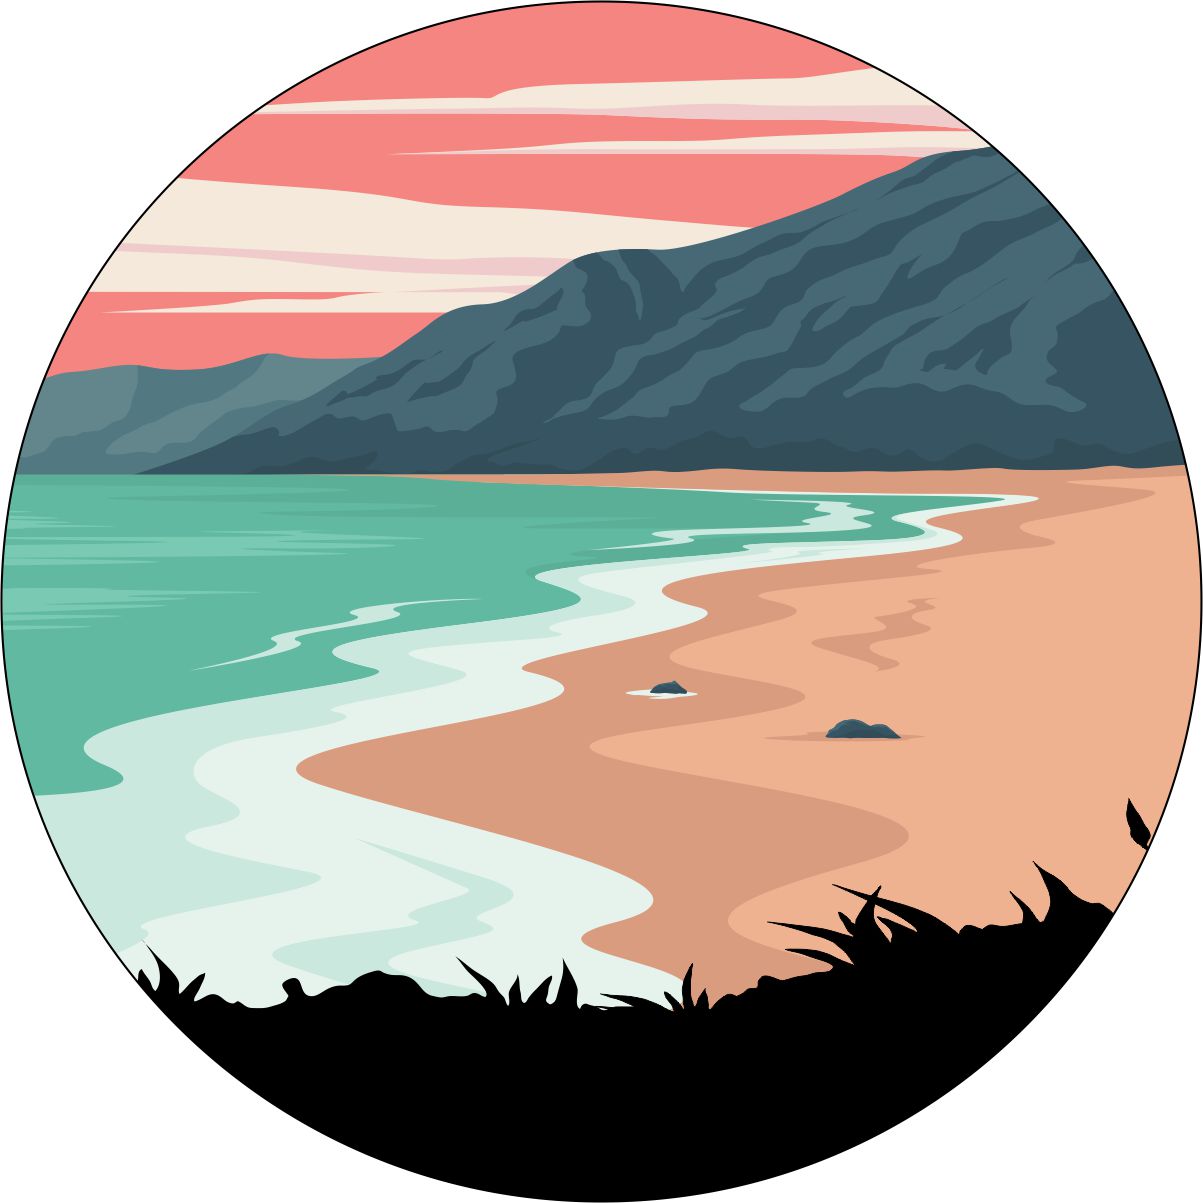 Beautiful pastel colored coastal scene spare tire cover. Where the mountains meet the sea somewhere on a beach spare tire cover